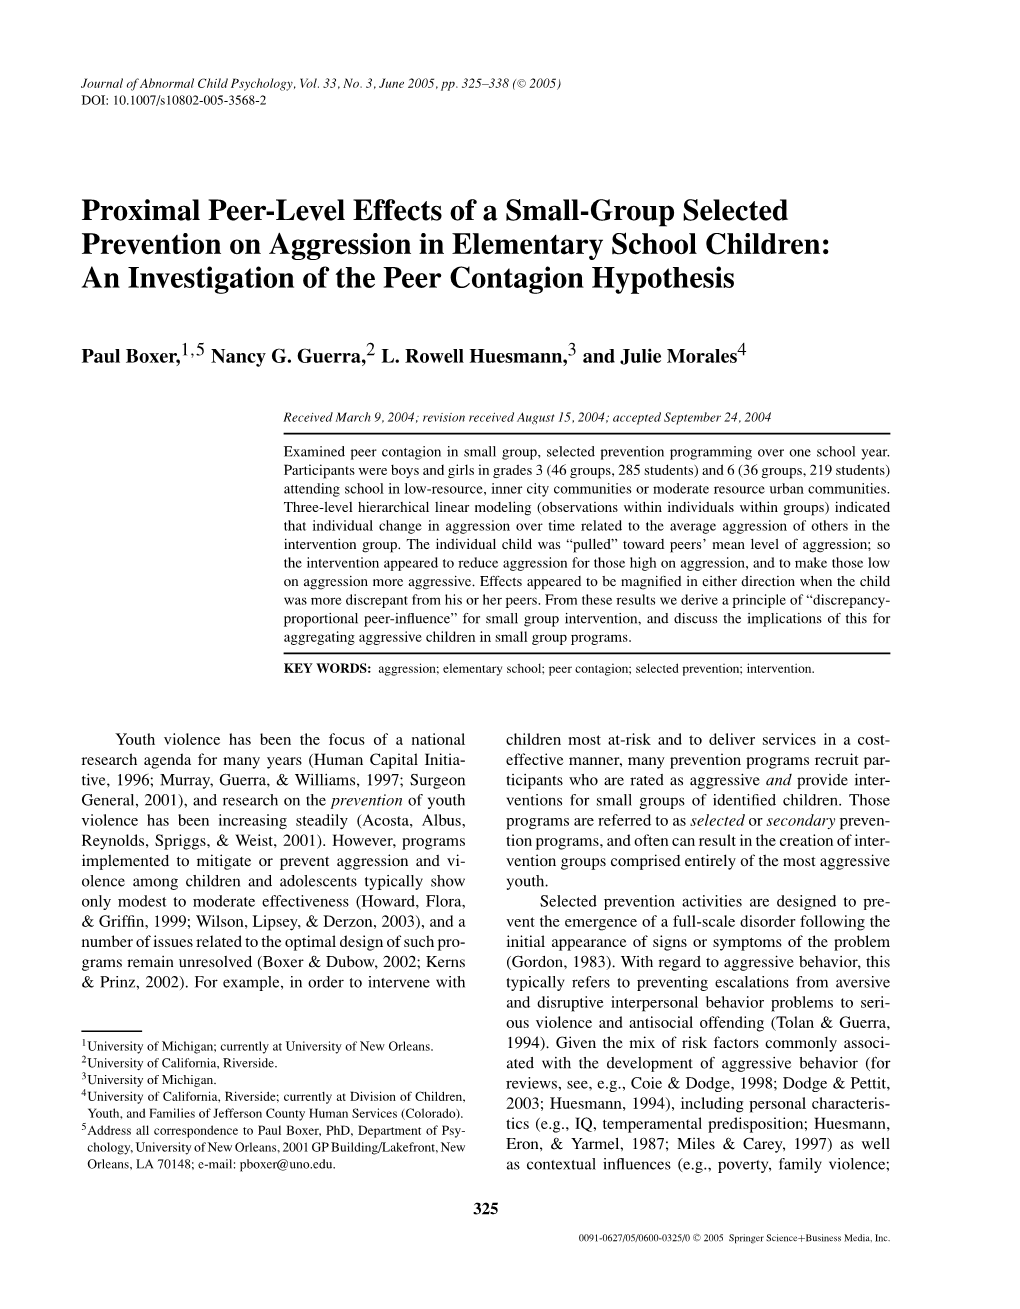 Proximal Peer-Level Effects of a Small-Group Selected Prevention on Aggression in Elementary School Children: an Investigation of the Peer Contagion Hypothesis